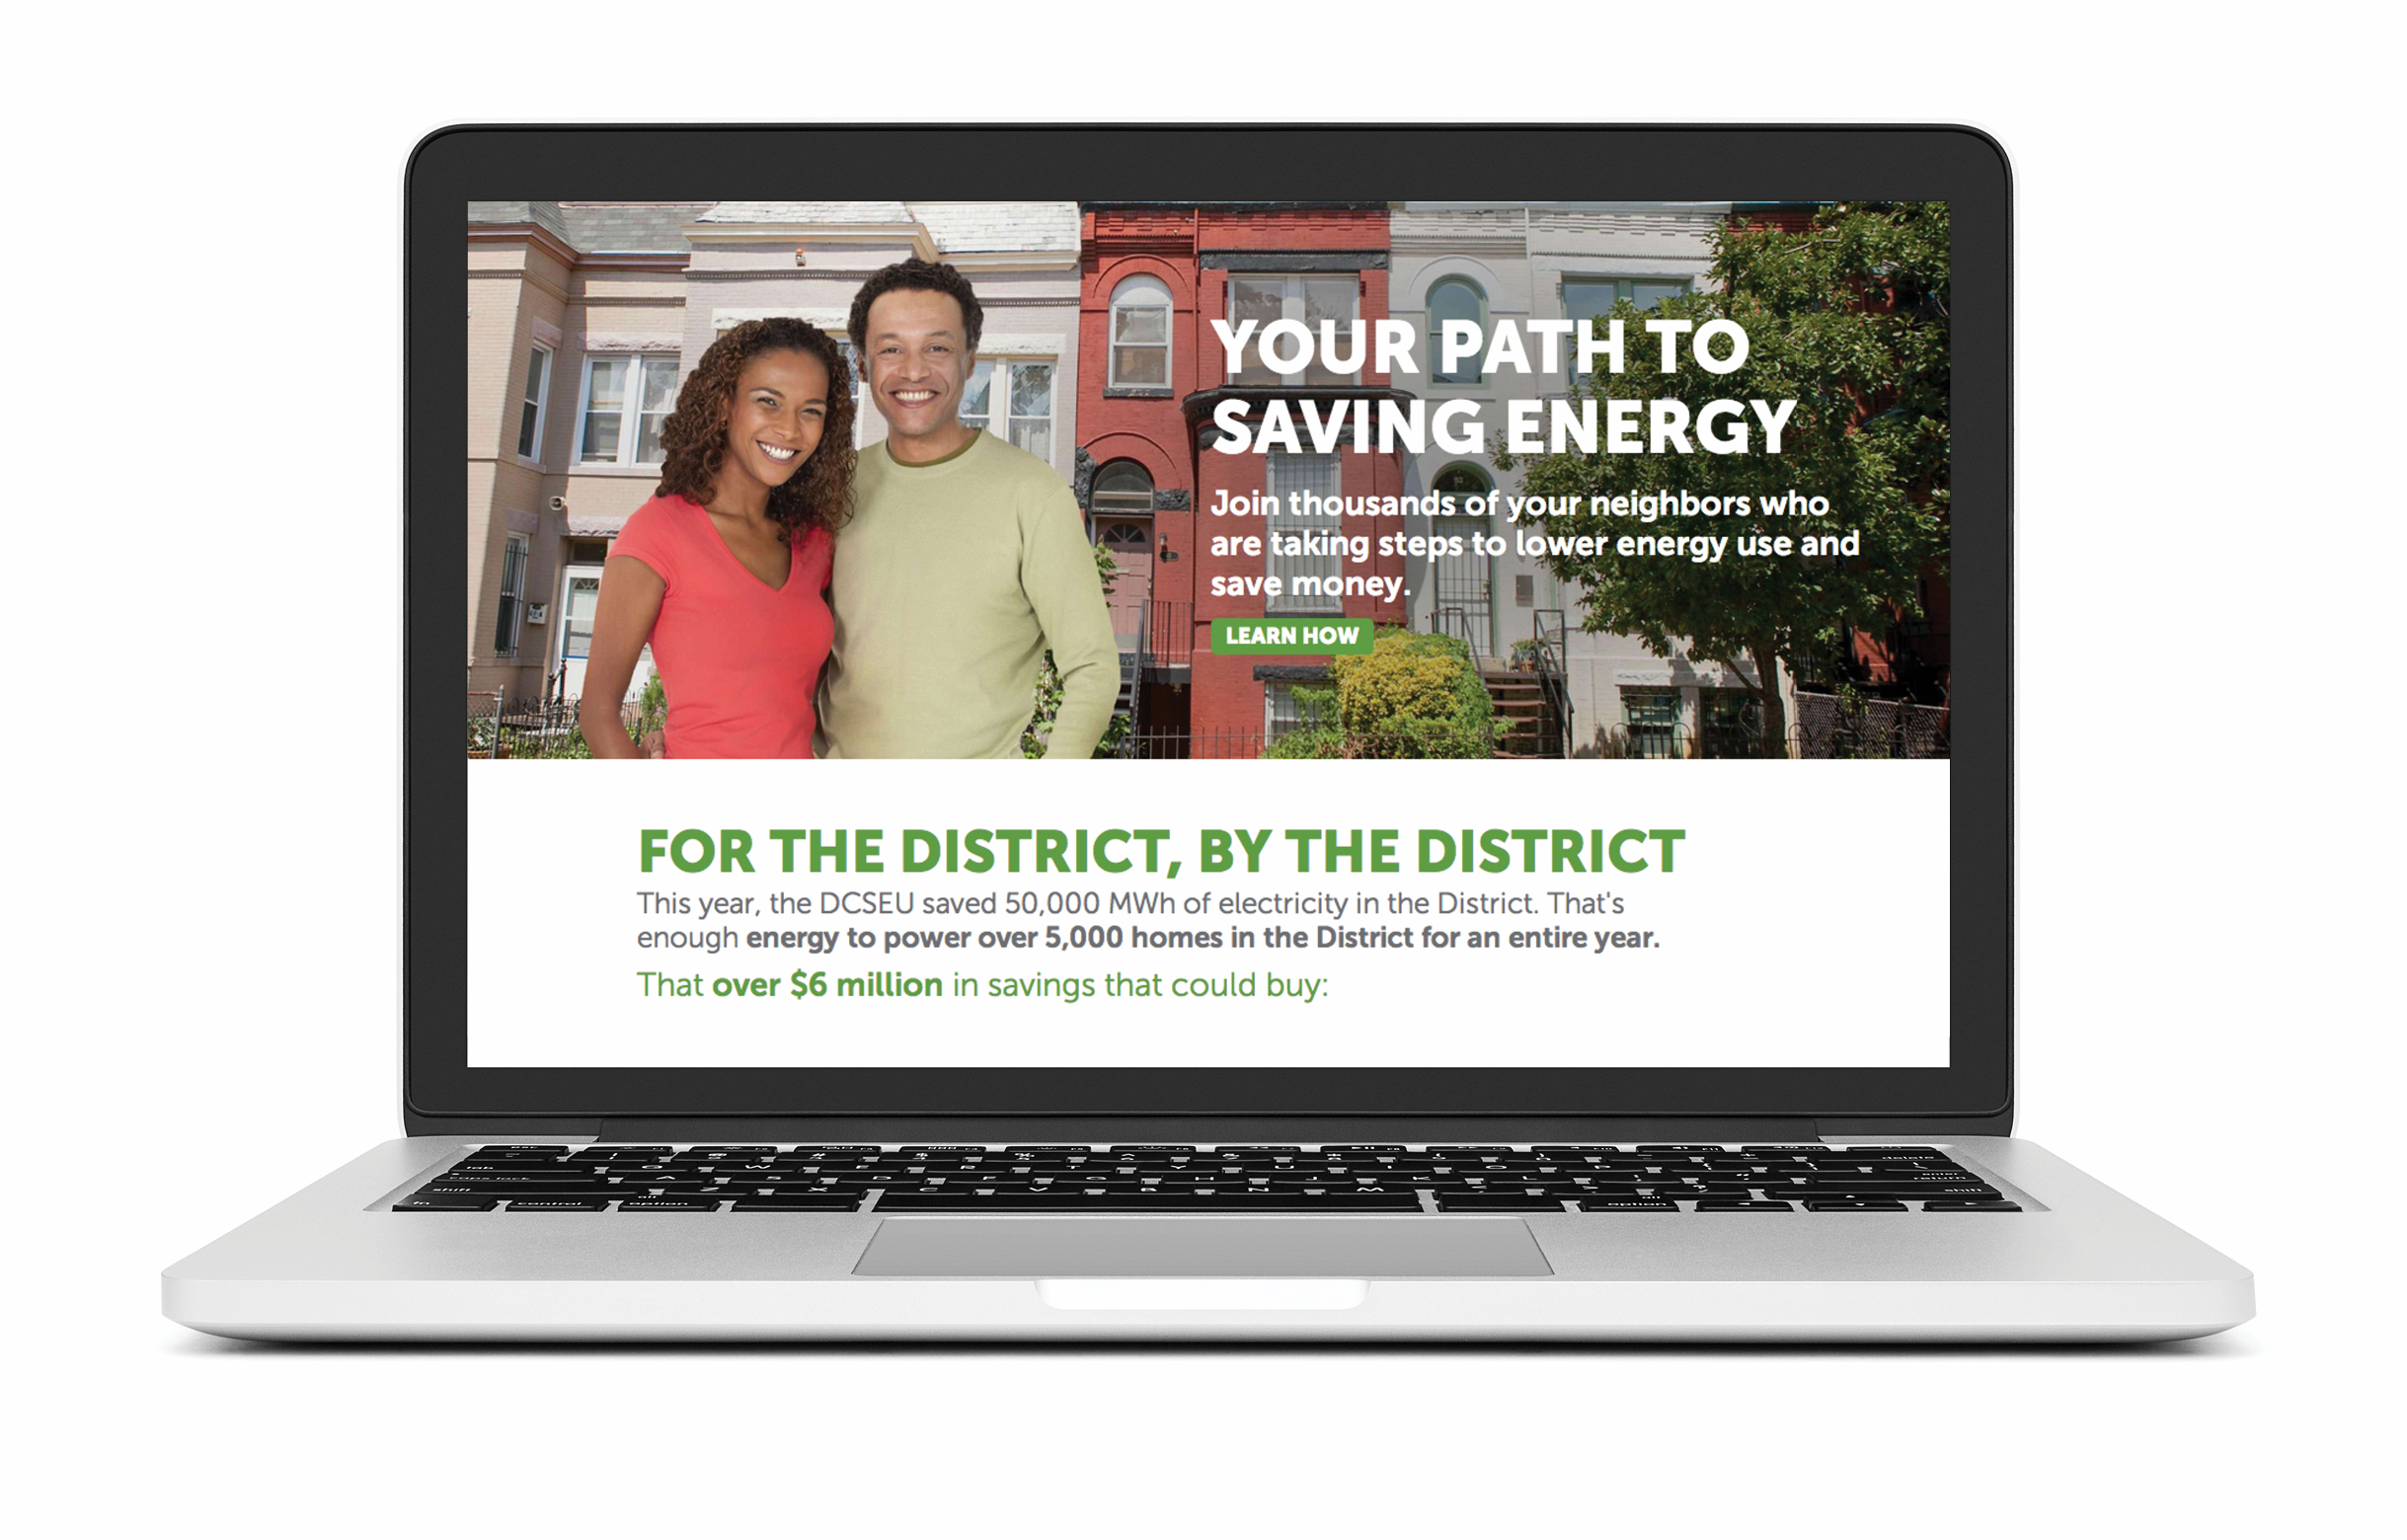 A Mac laptop showing the DCSEU landing web page with a full width image of a smiling couple in front of DC row homes. Next to the couple, the headline is set in a geometric sans serif type: ‘Your path to saving energy’. Under the image is the headline ‘For the District, By the District’ with energy saving stats beneath it.